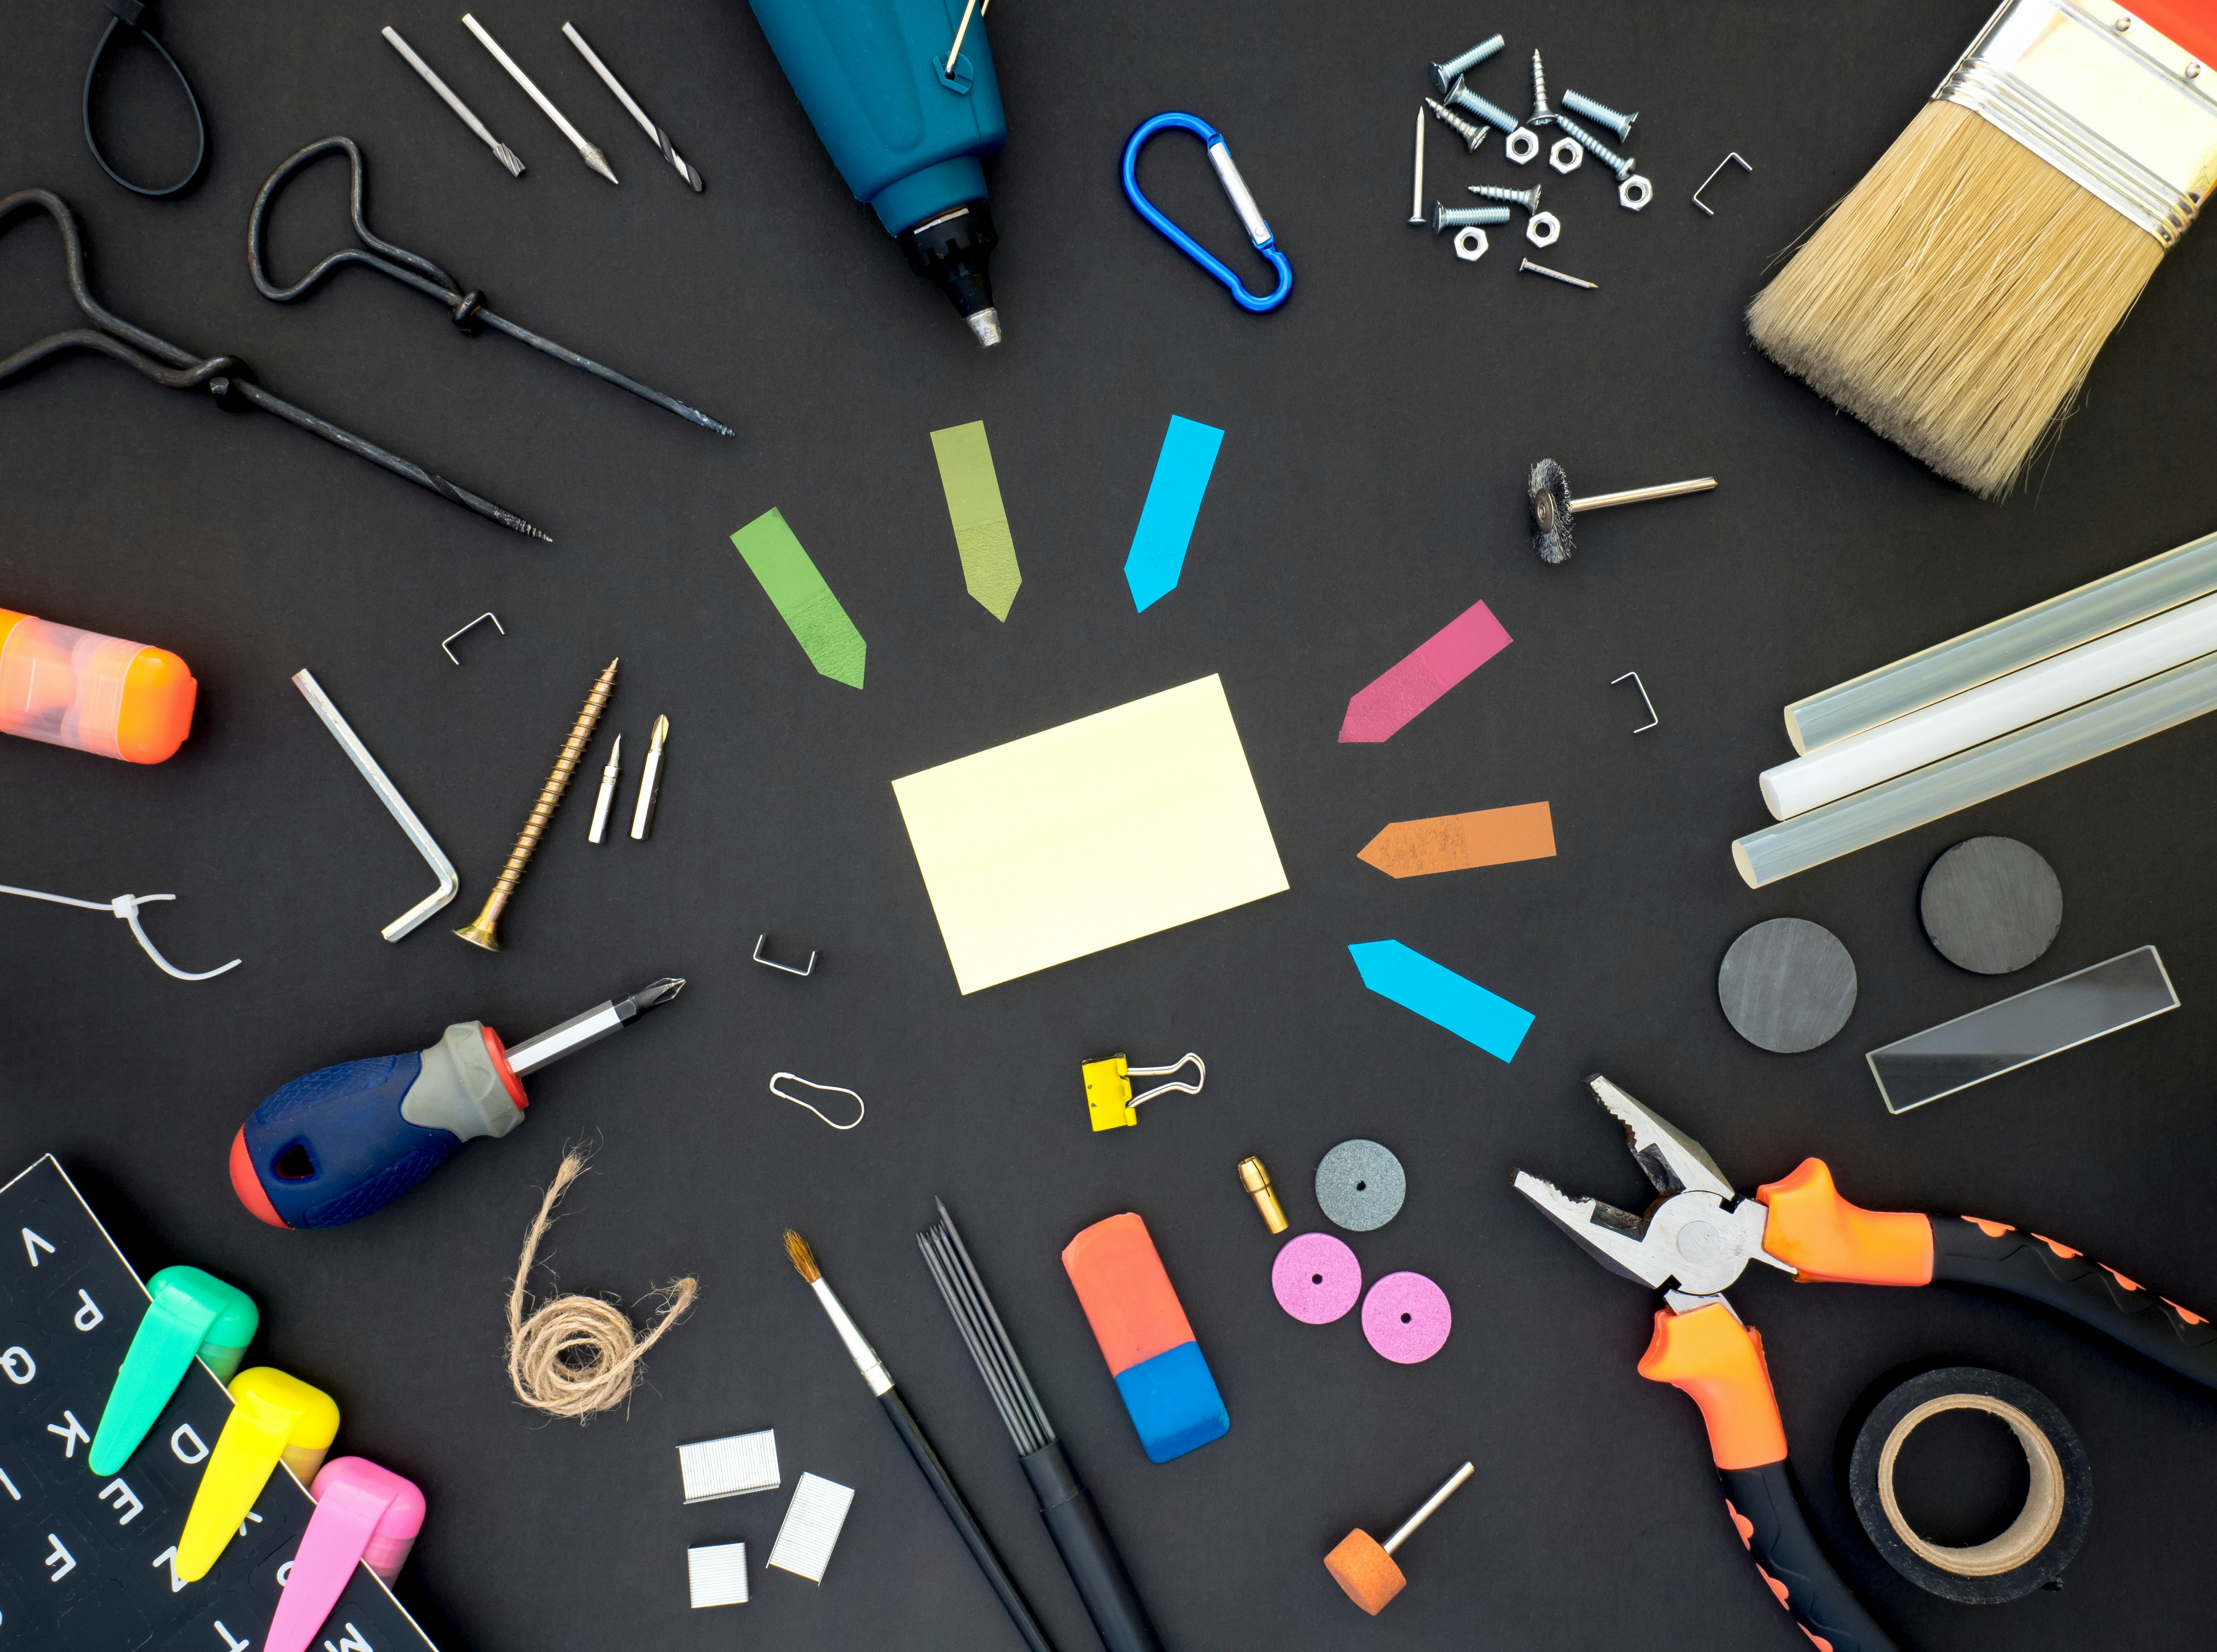 A variety of tools arranged on a black surface, including a screwdriver, drill, pliers, paintbrush, and various hardware. This image symbolizes the versatility and efficiency of the Python functools module for code optimization, showcasing how different tools can enhance coding projects.